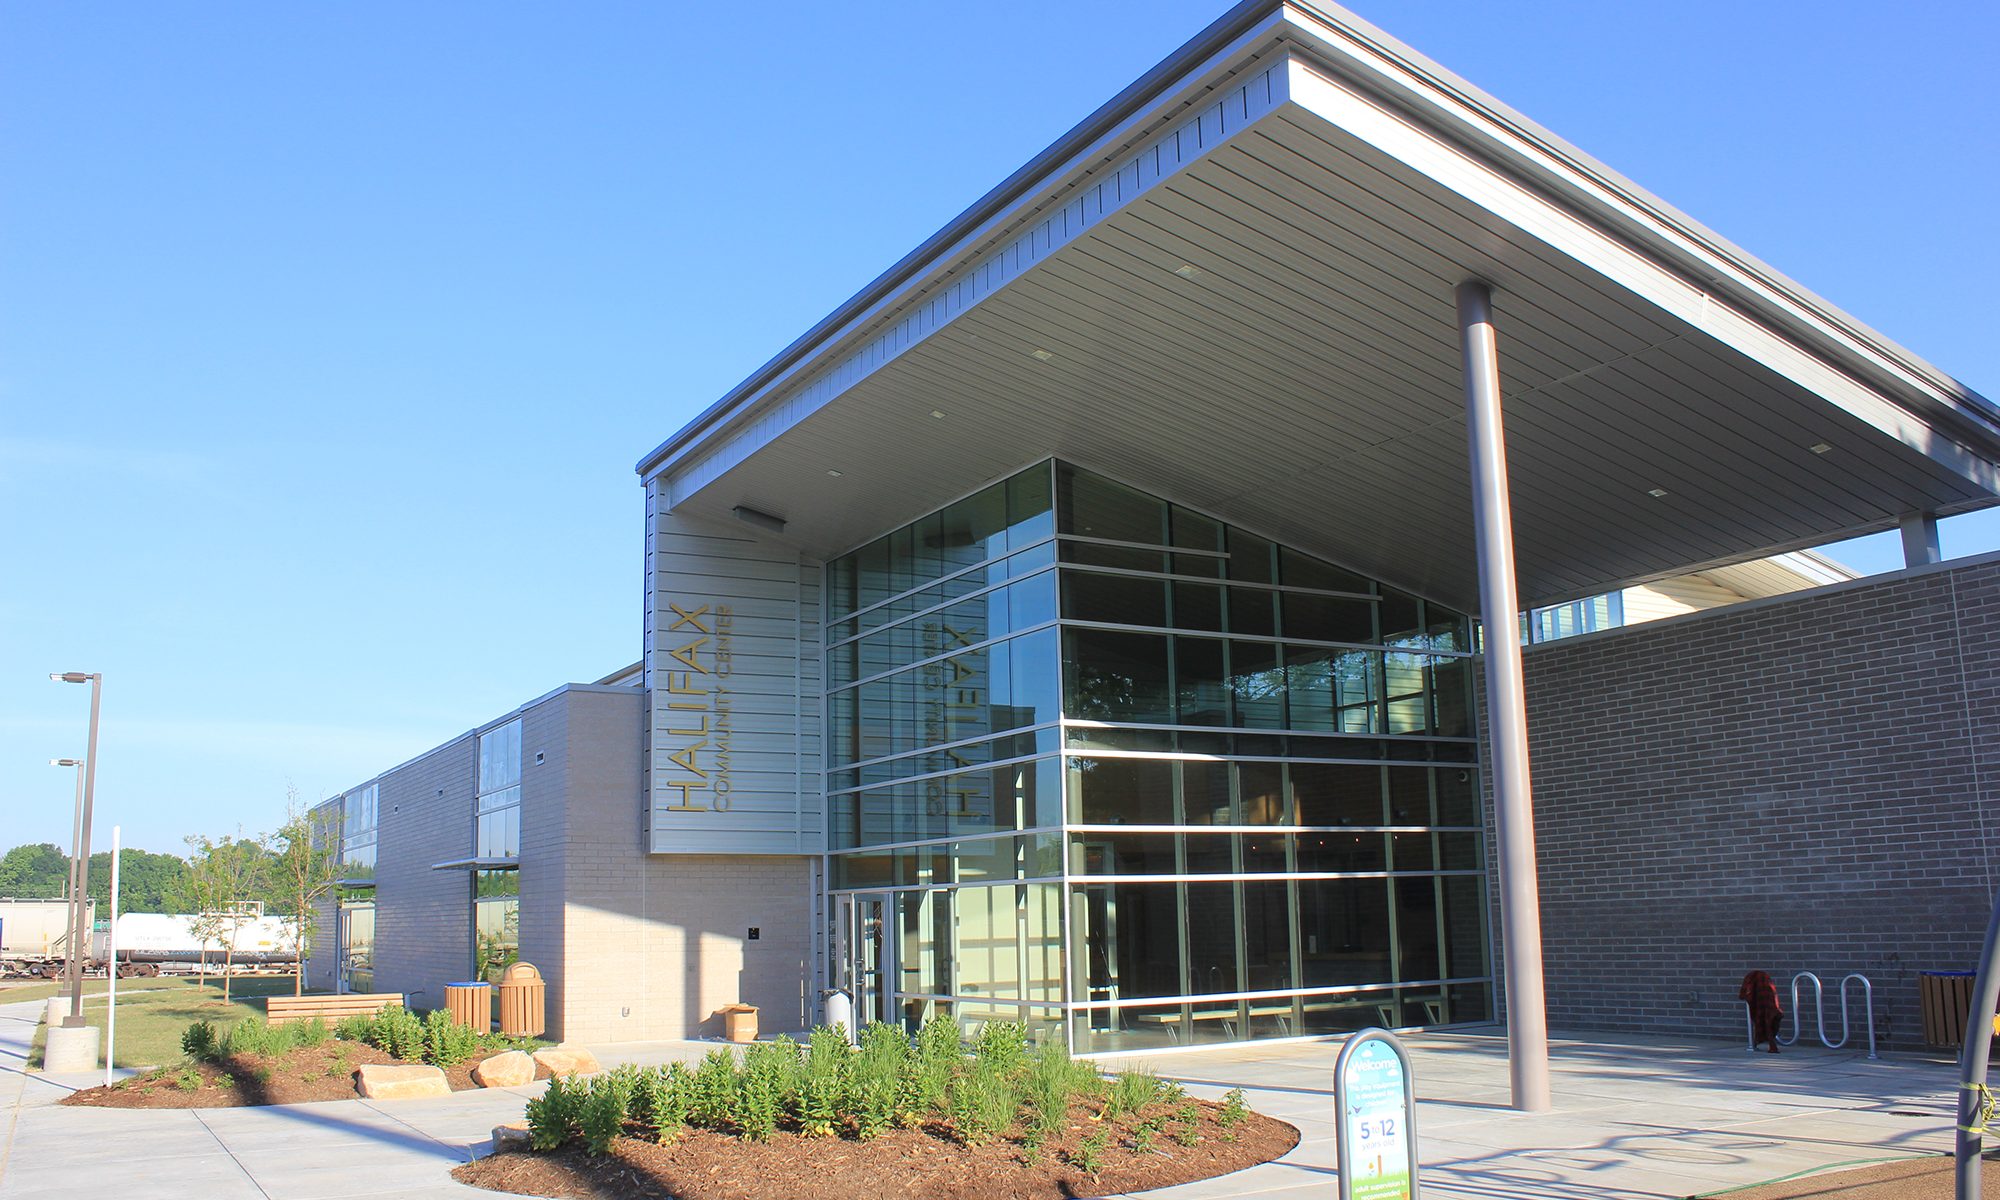 Exterior of Halifax Park and Community Center